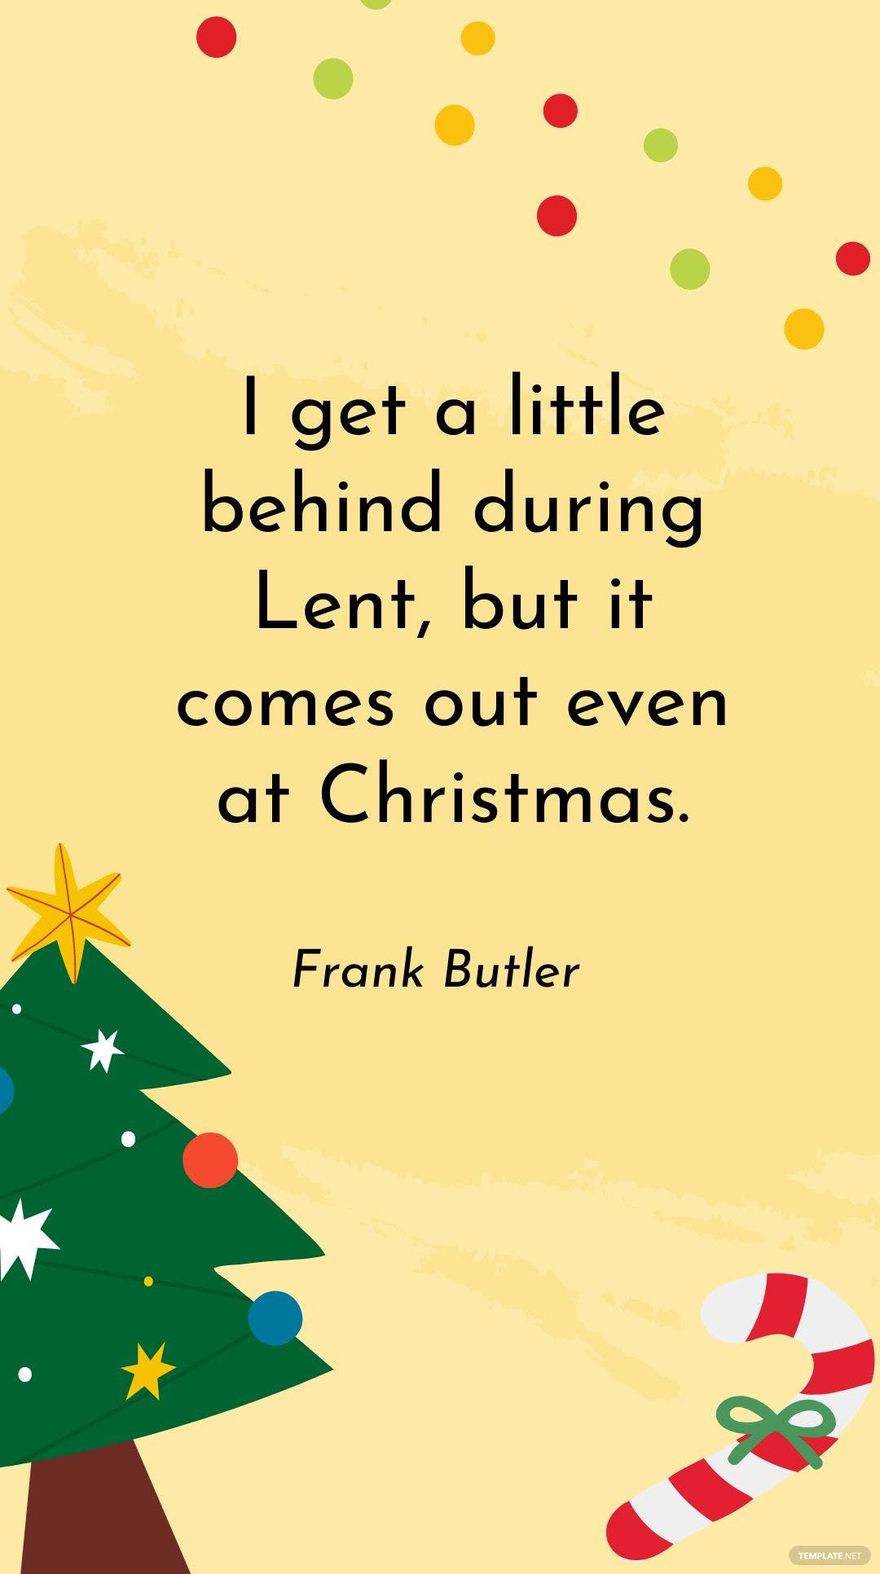 Free Frank Butler - I get a little behind during Lent, but it comes out even at Christmas.